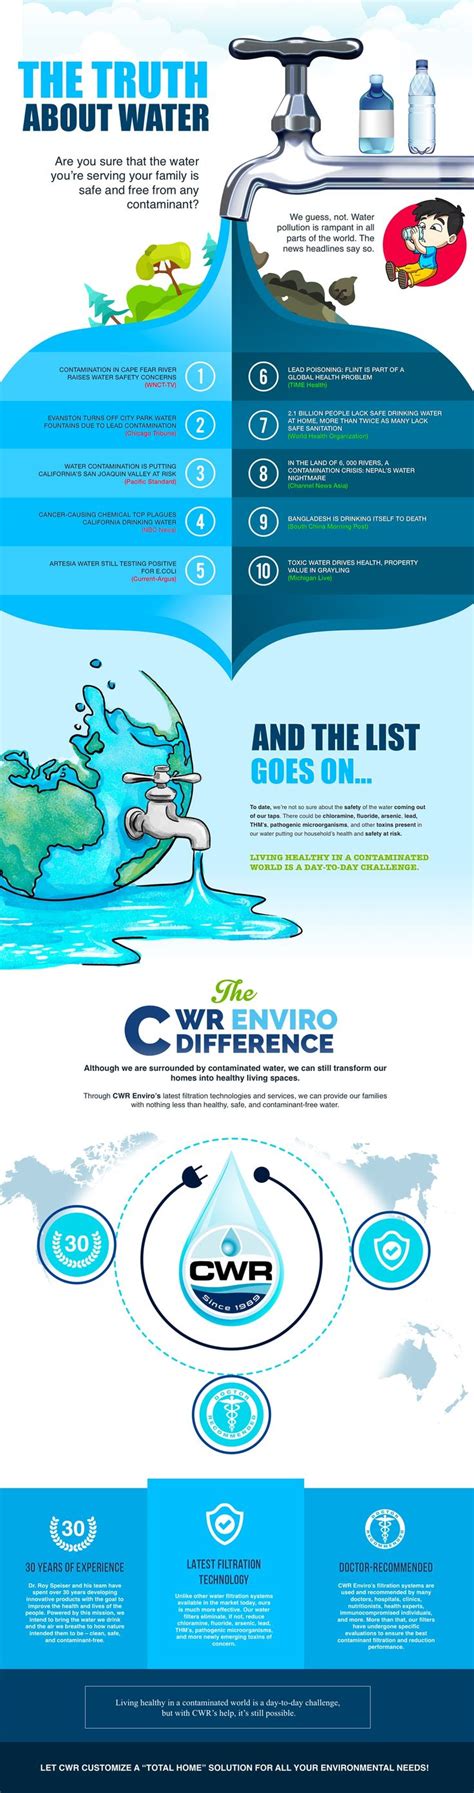 Wrote Infographic Copy For This Water Infographic Save Water